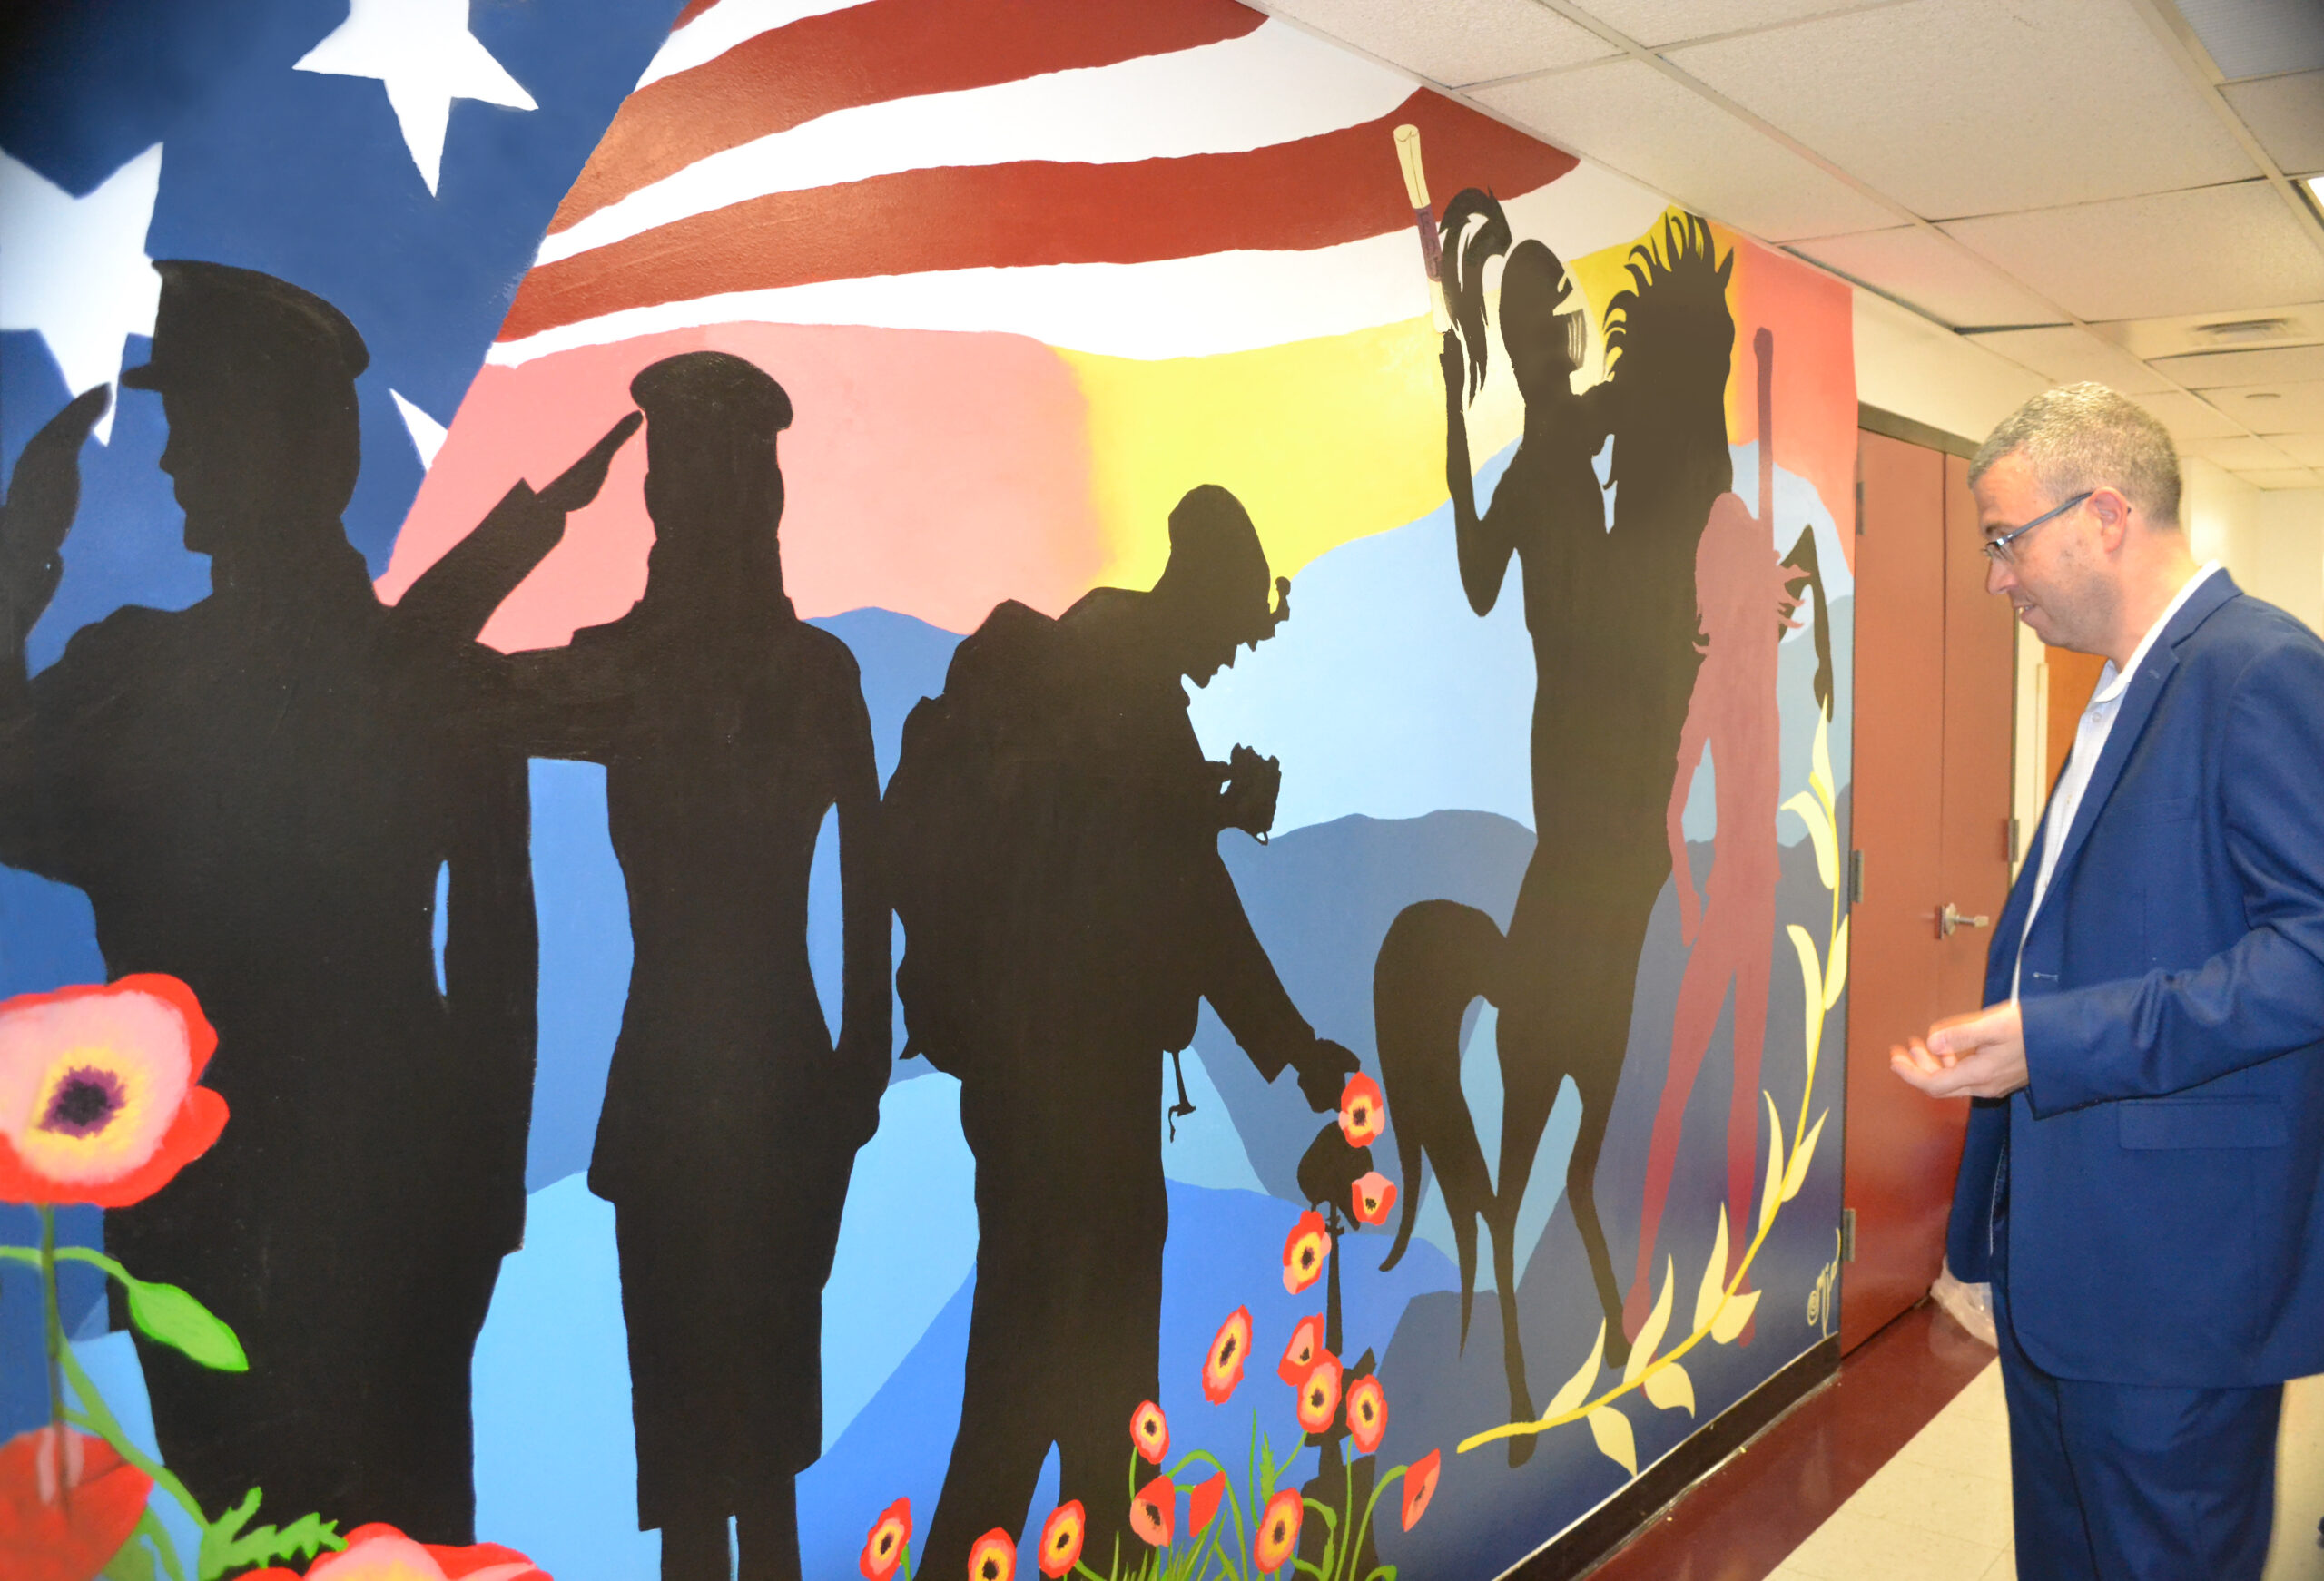 A mural depicts a veterans' journey. A man stands in front of the art, absorbing it.